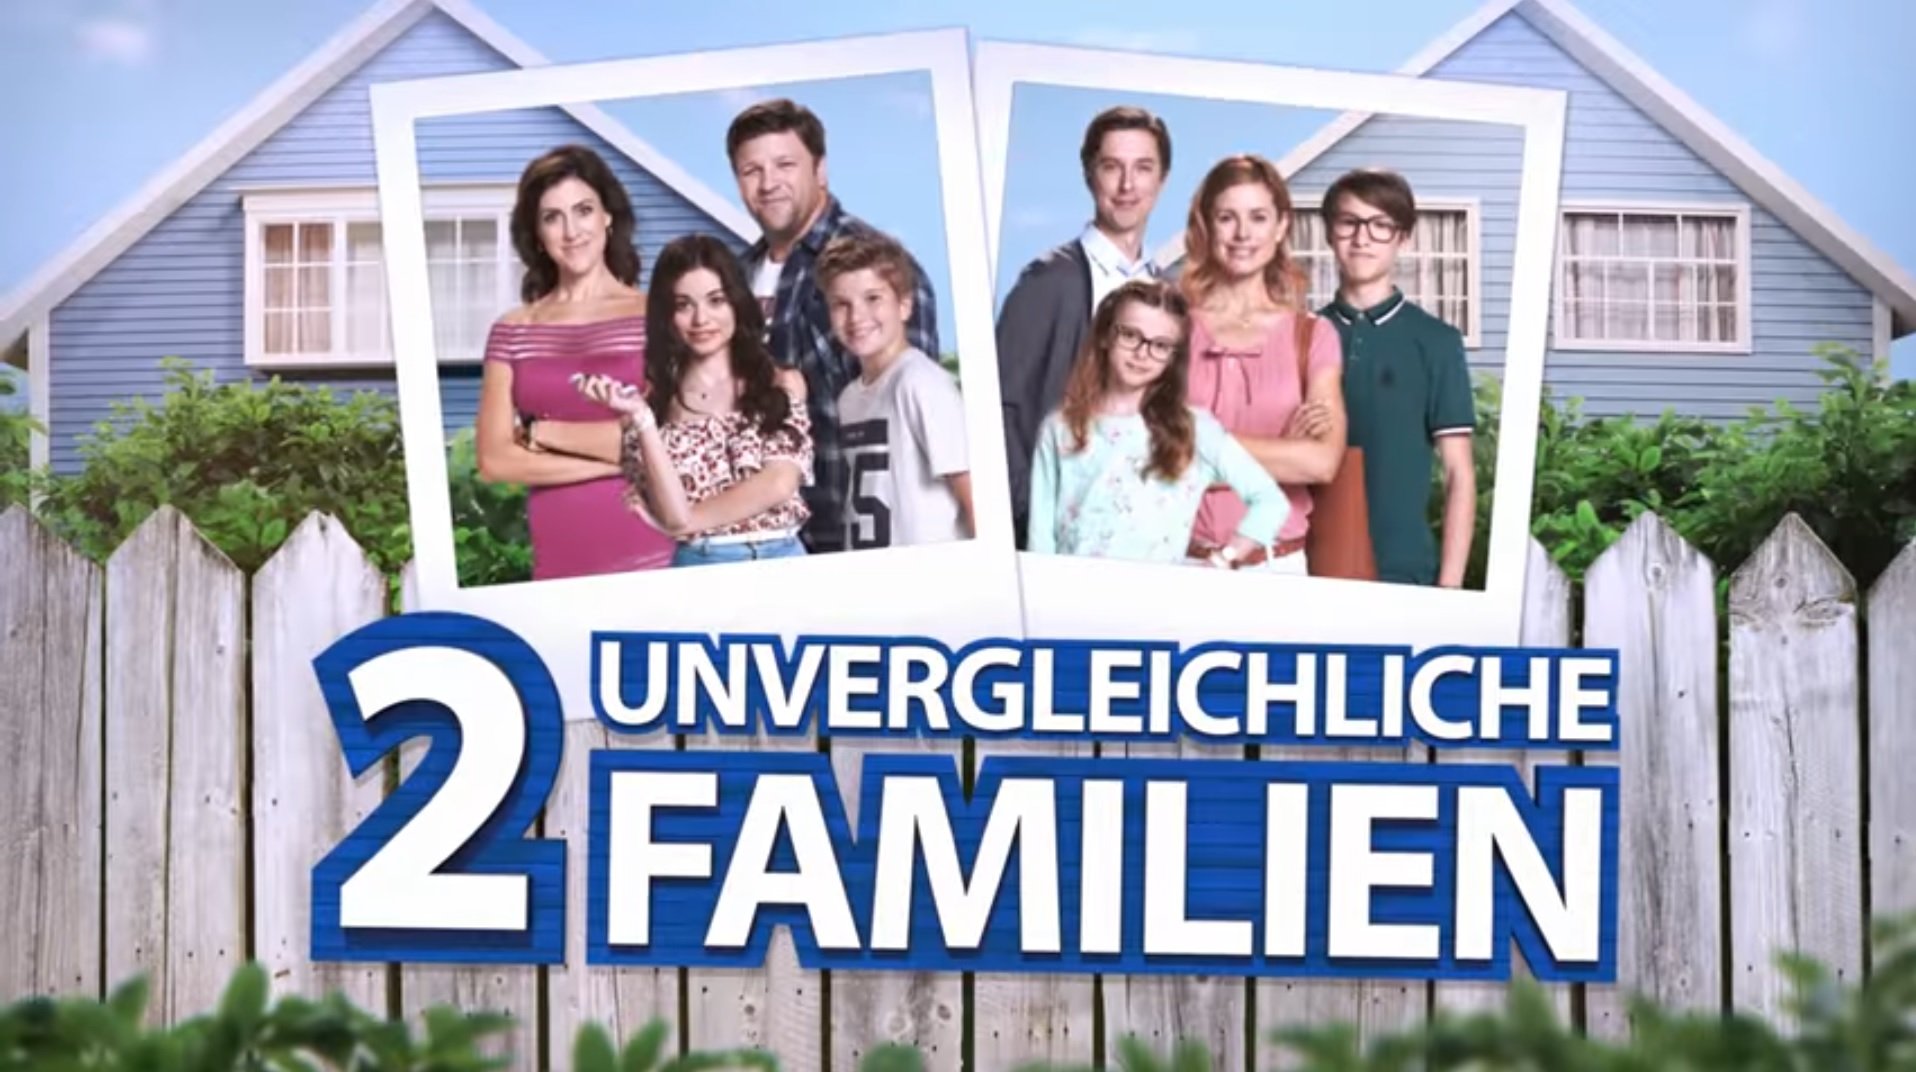 Check 24 Familie